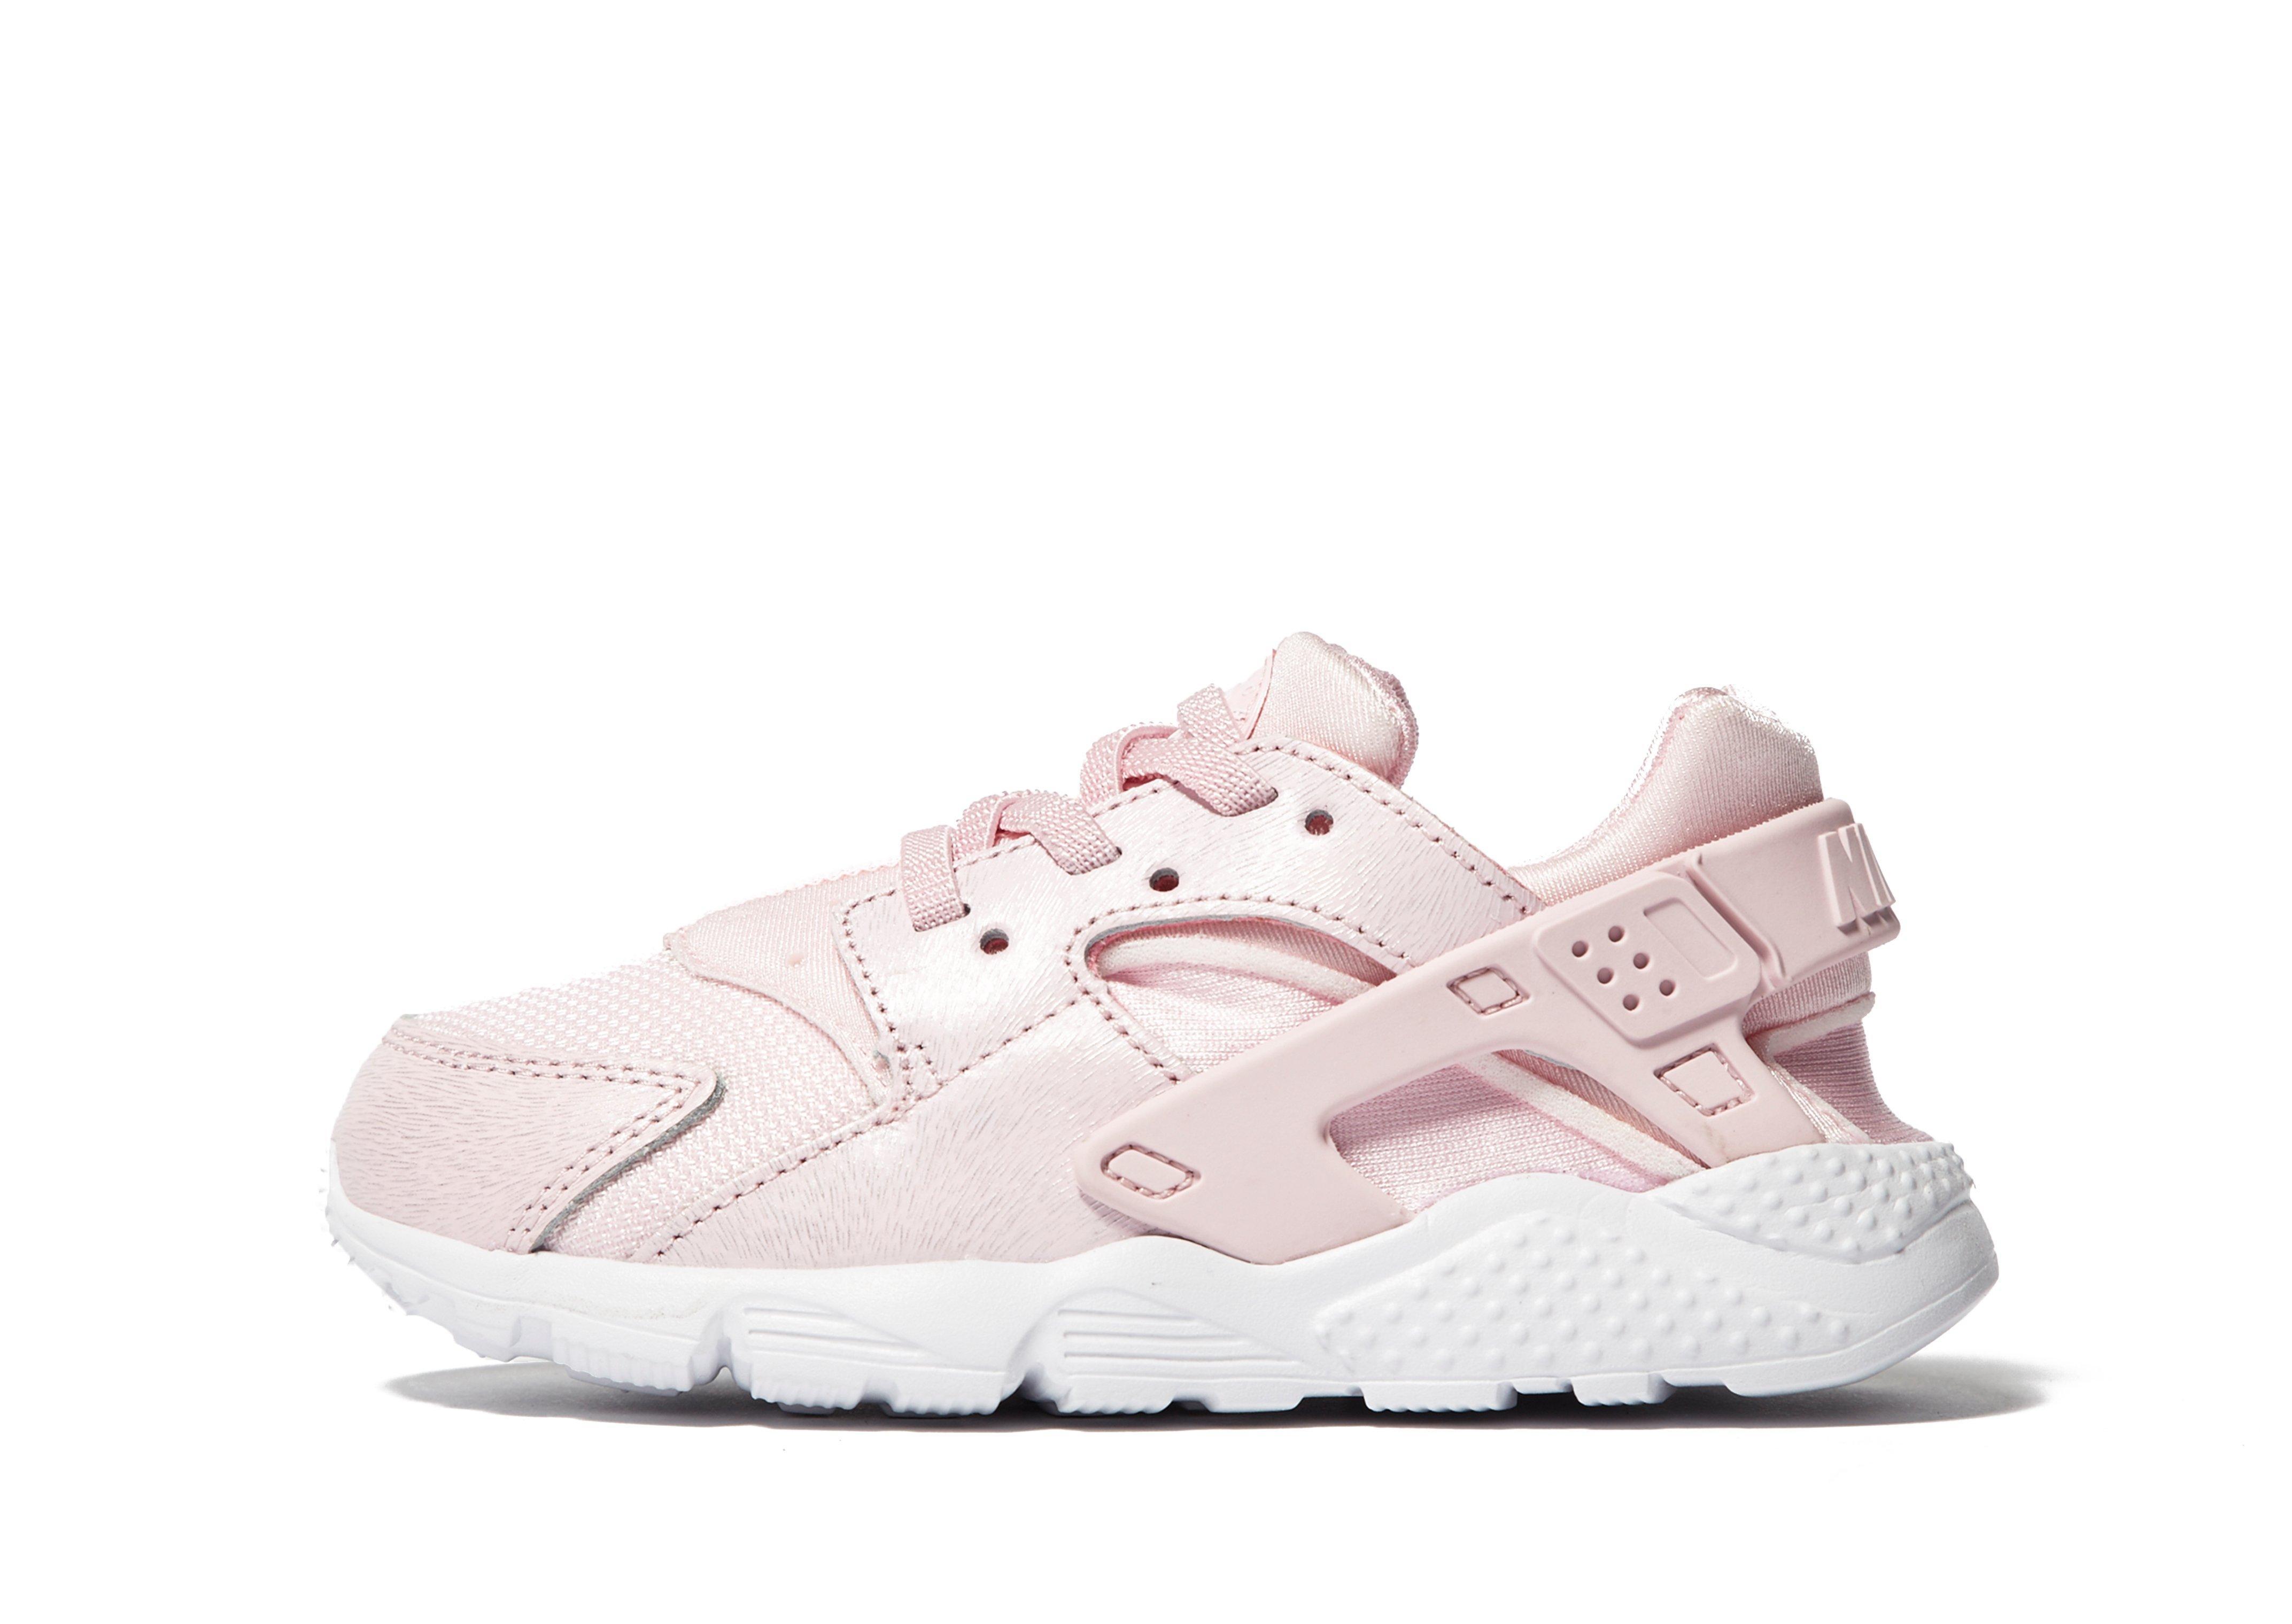 infant huaraches pink